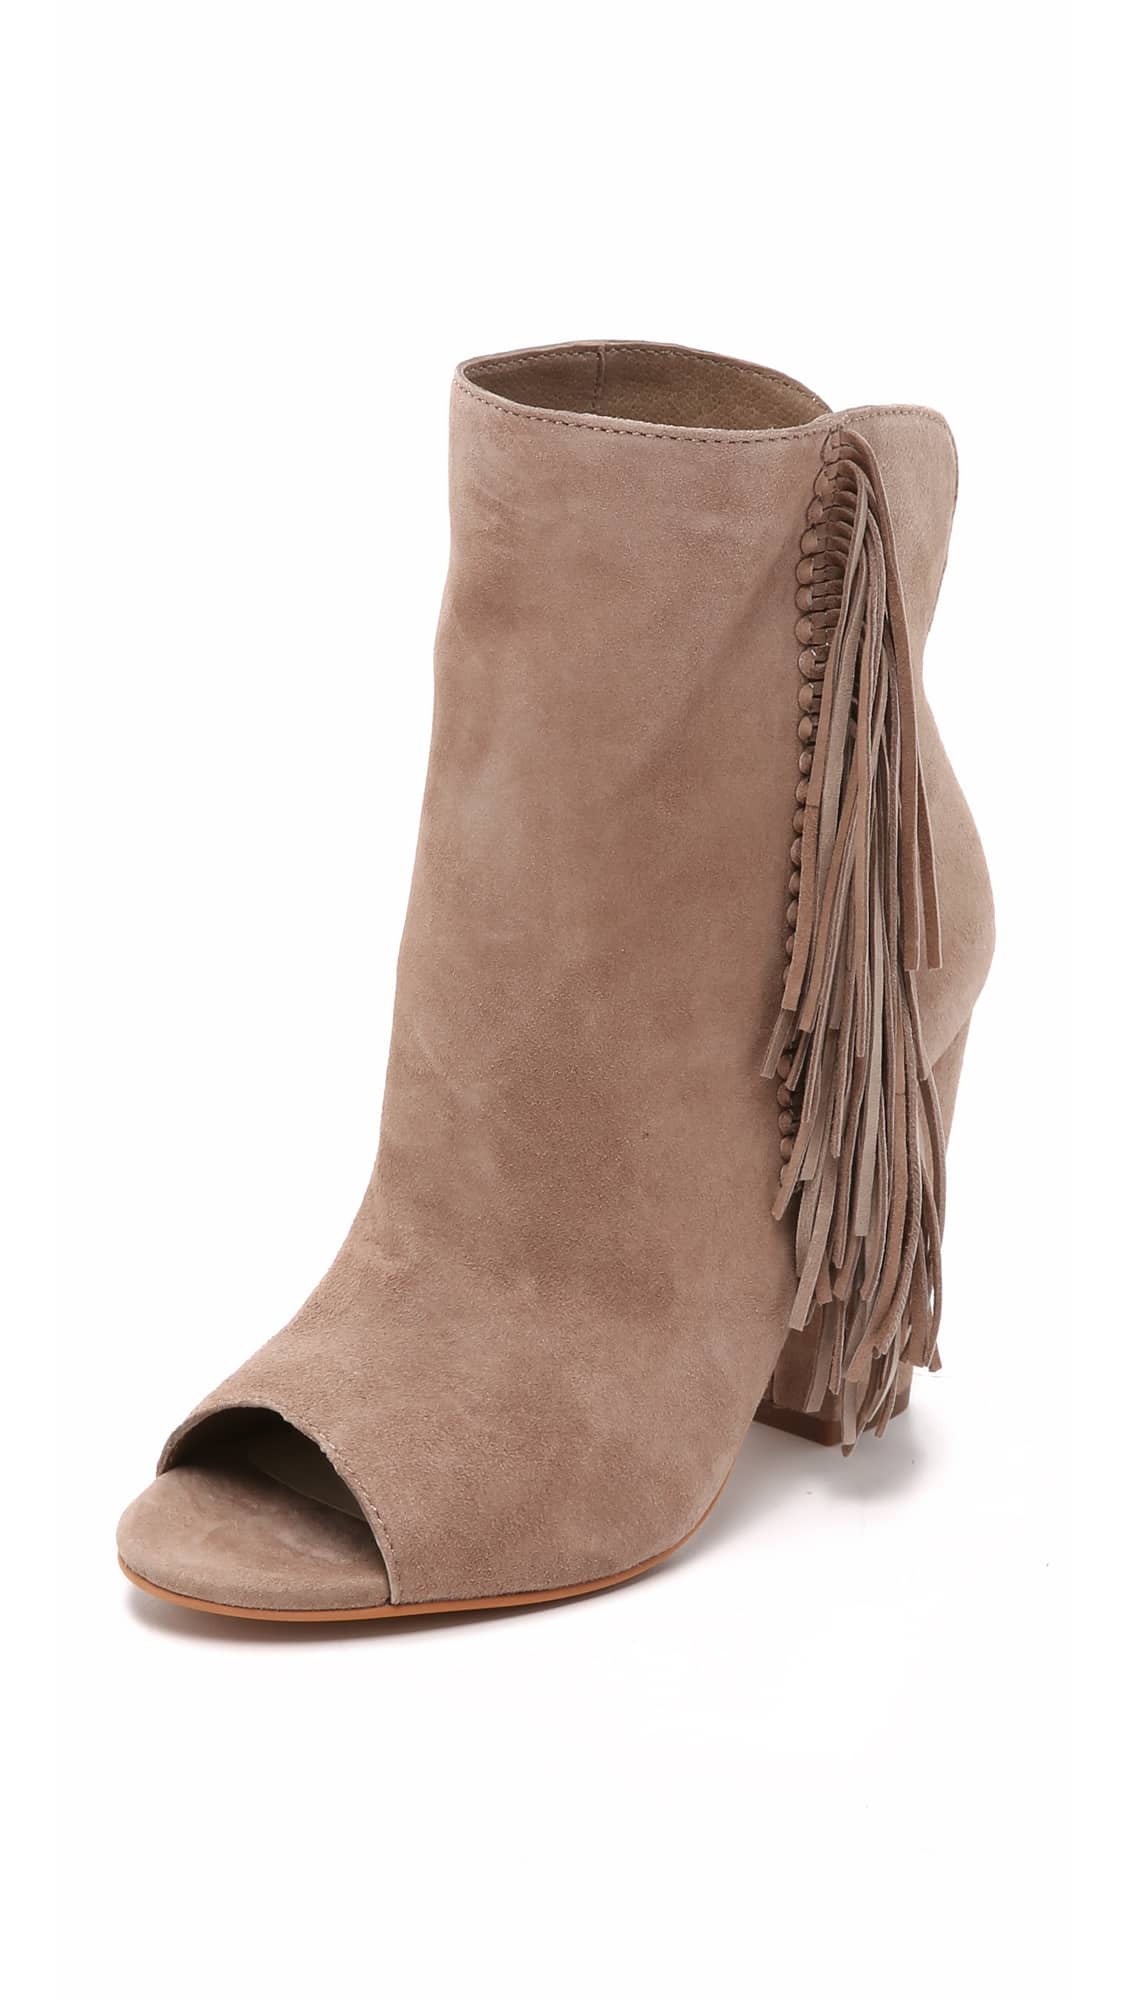 A good open toe bootie is necessary all year-round! $126